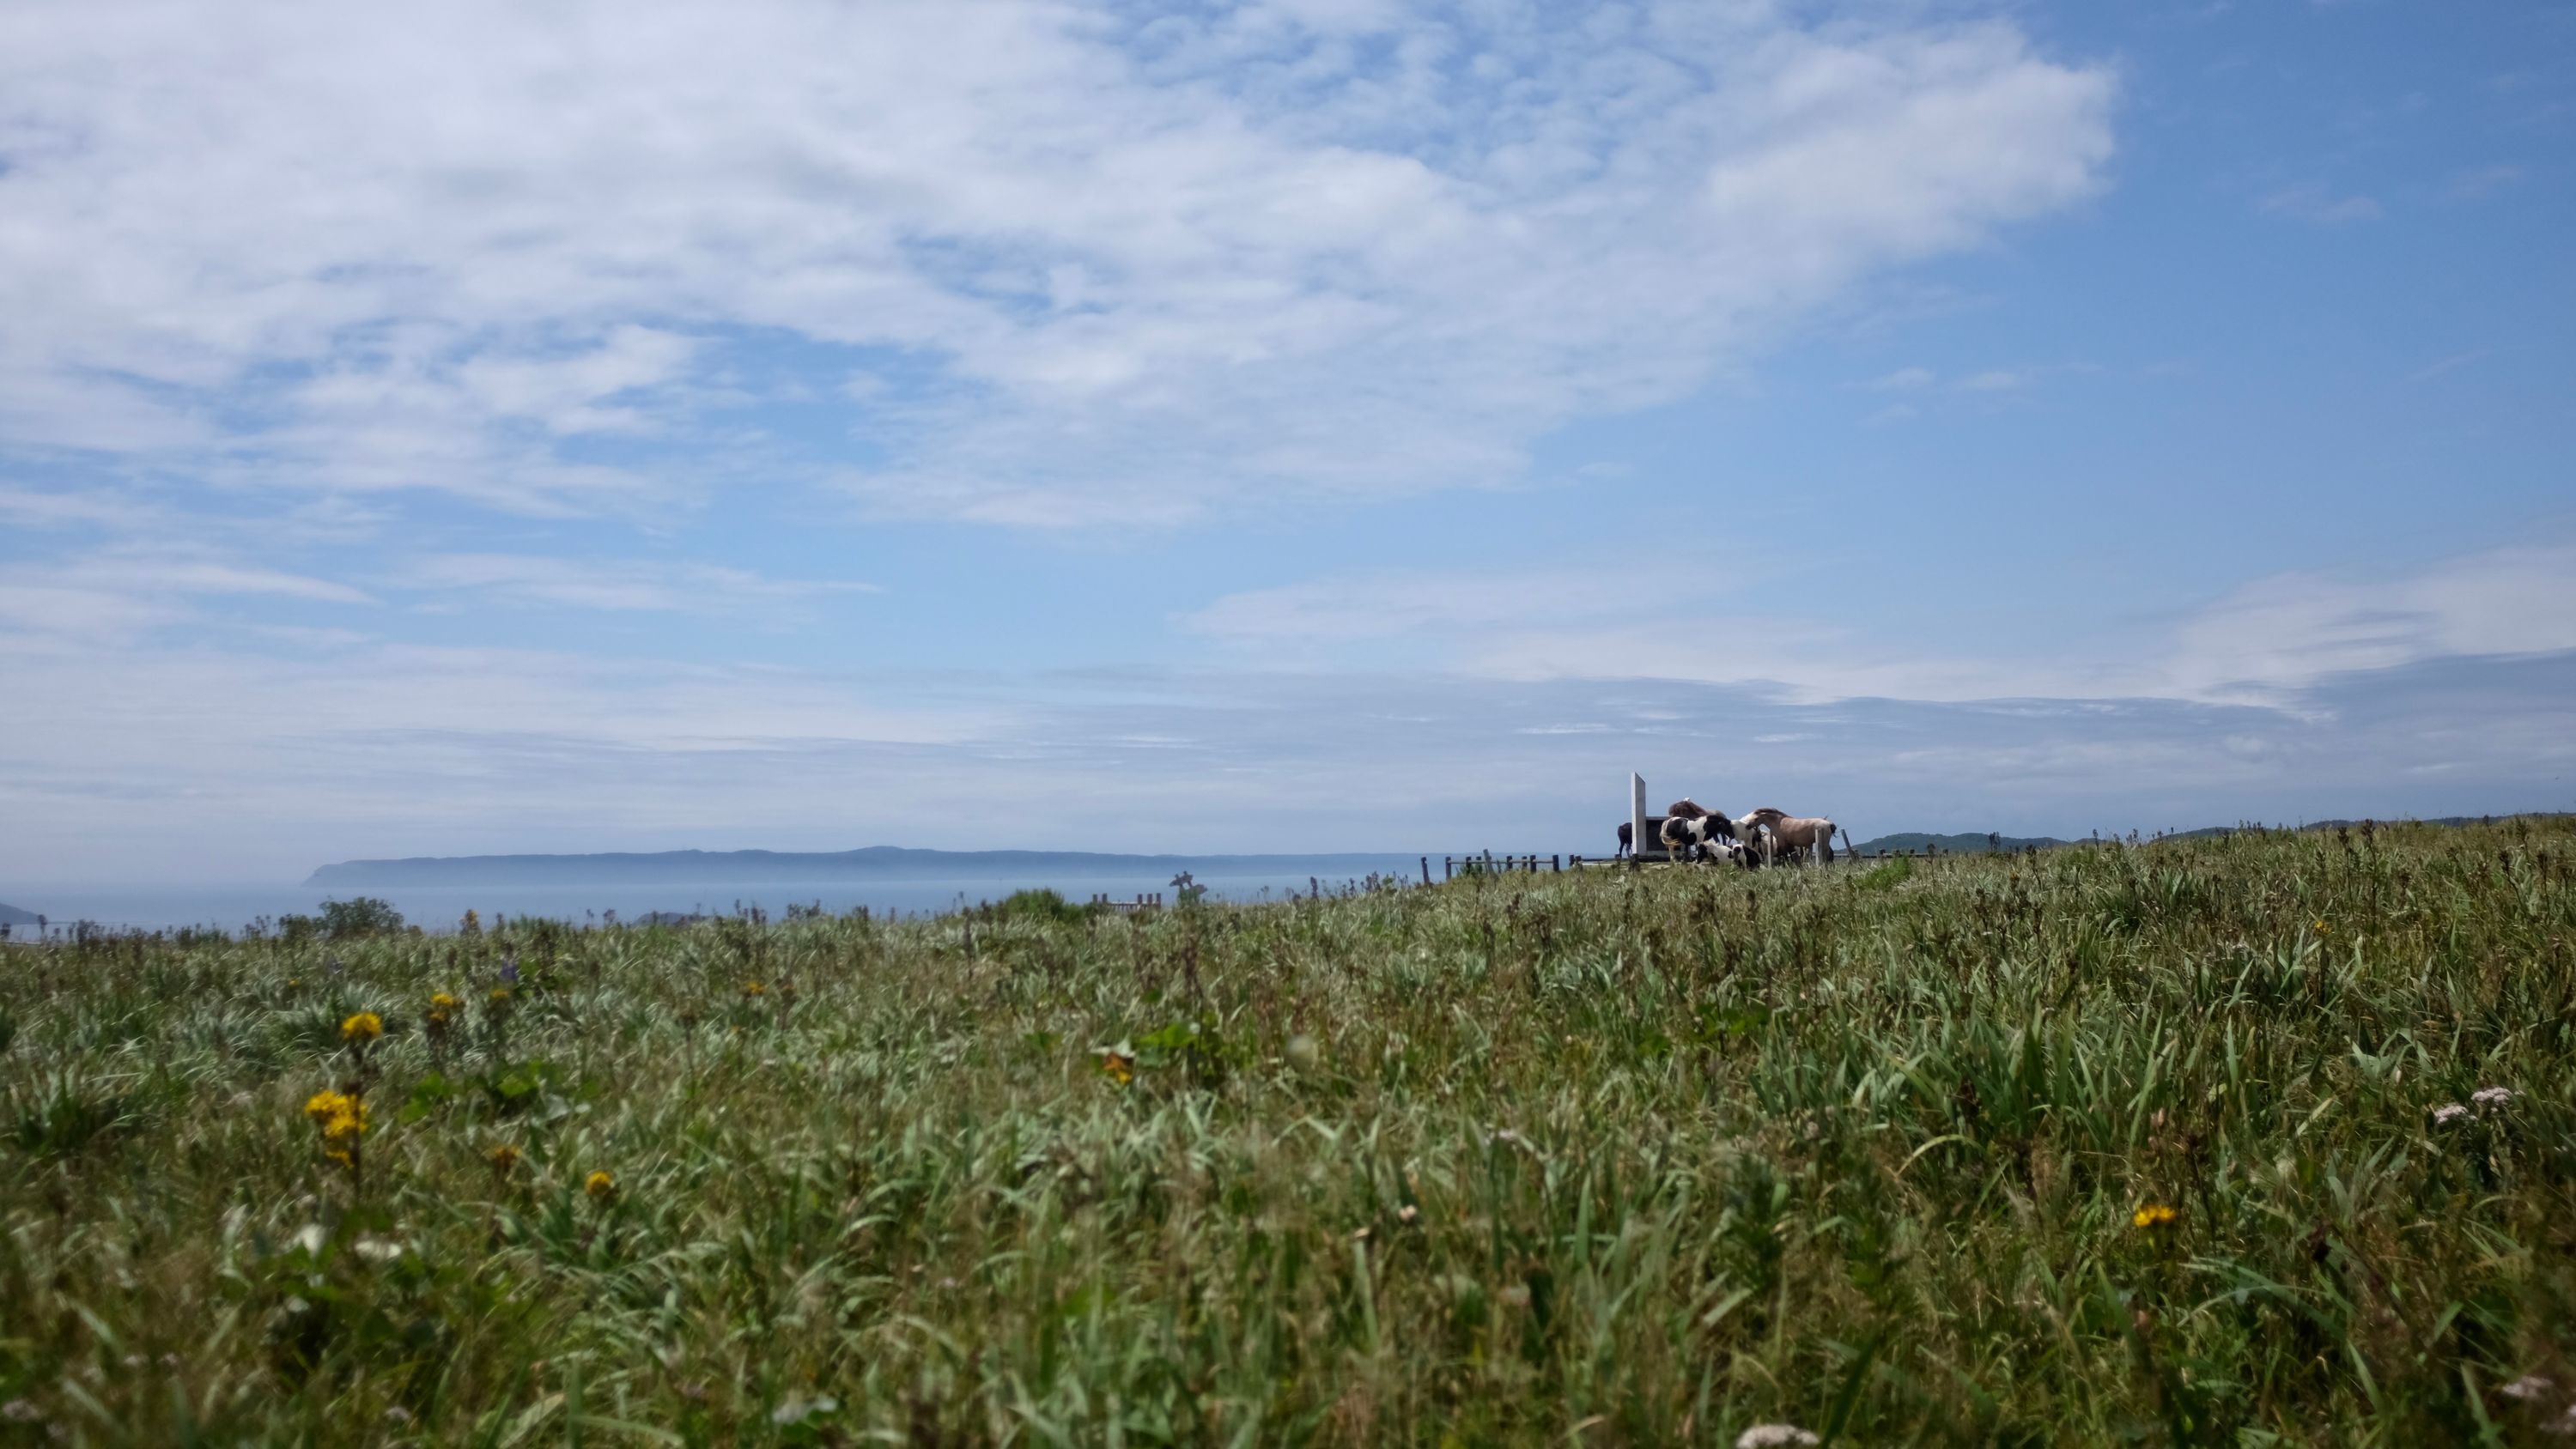 A small herd of horses huddle against the wind on a meadow by the ocean.